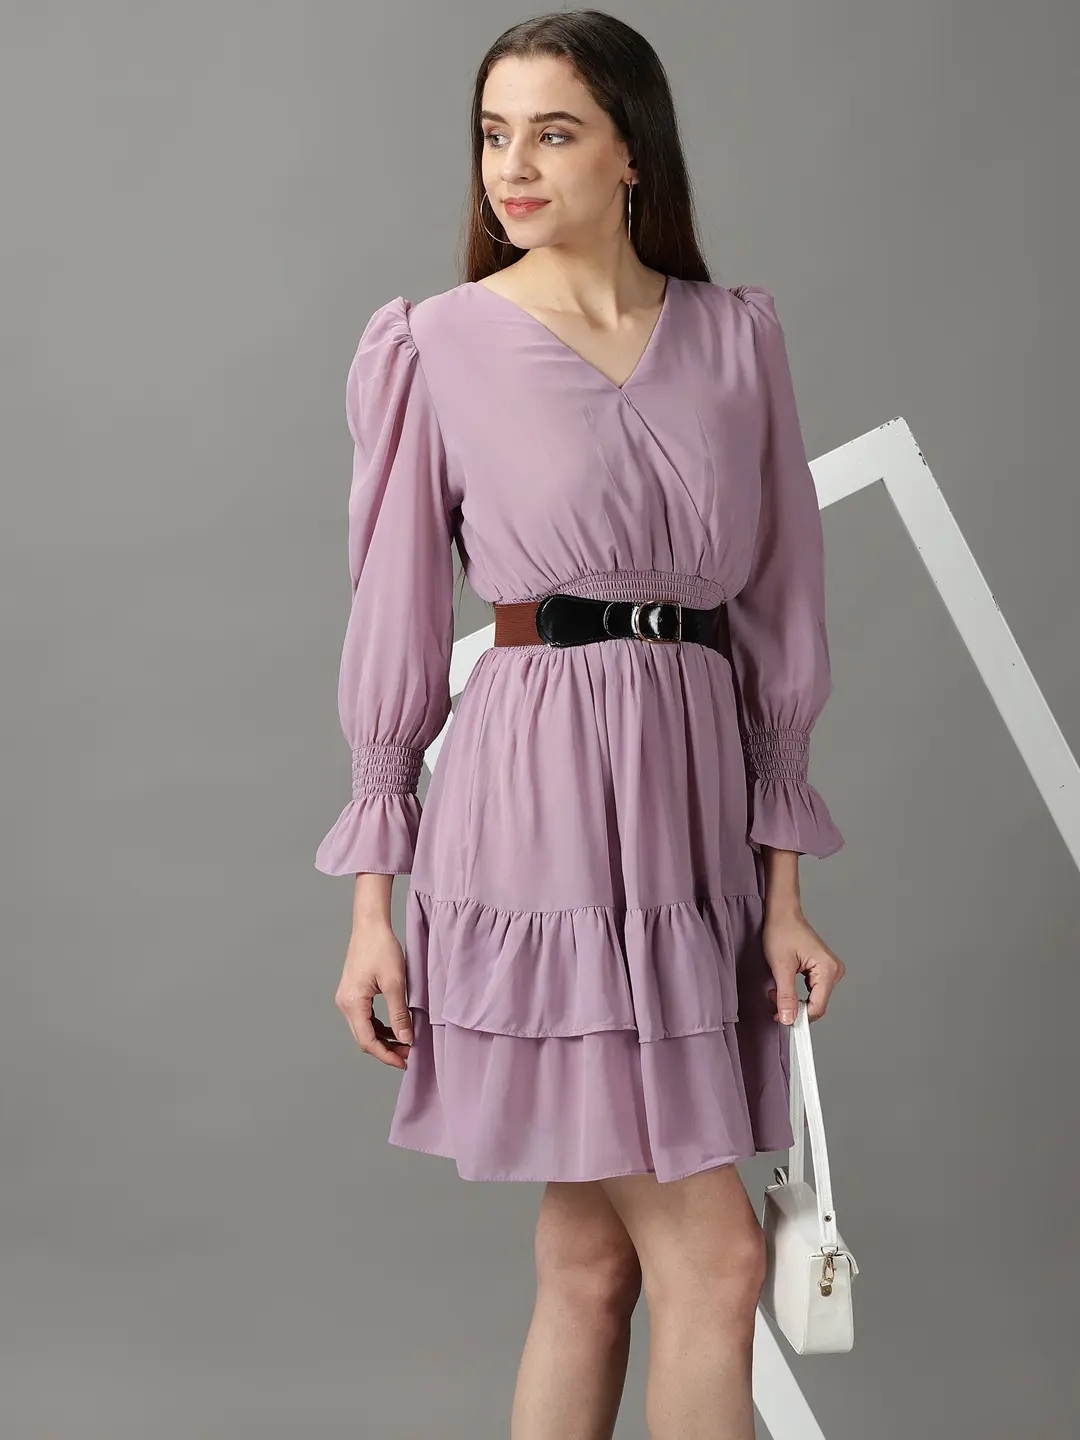 SHOWOFF Women's Fit and Flare Lavender Solid Above Knee Dress